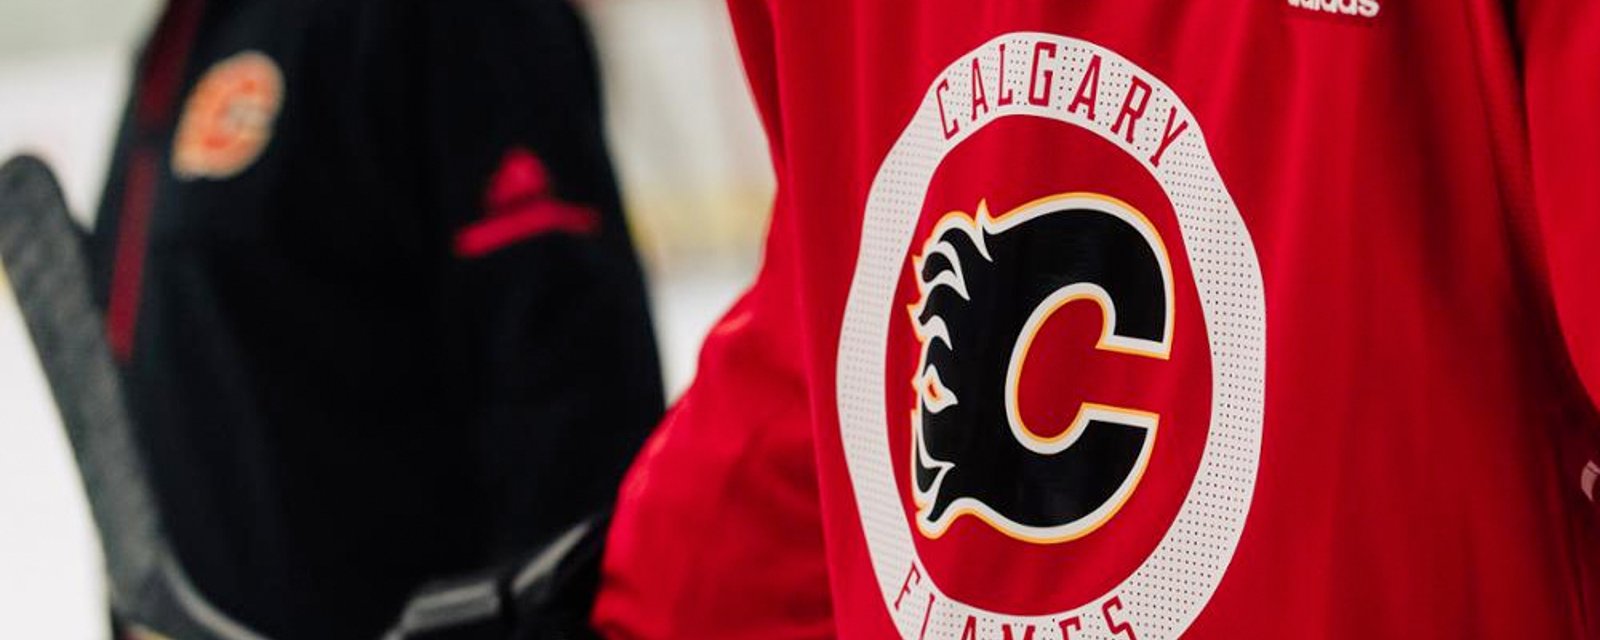 Report: Flames moving training camp to United States